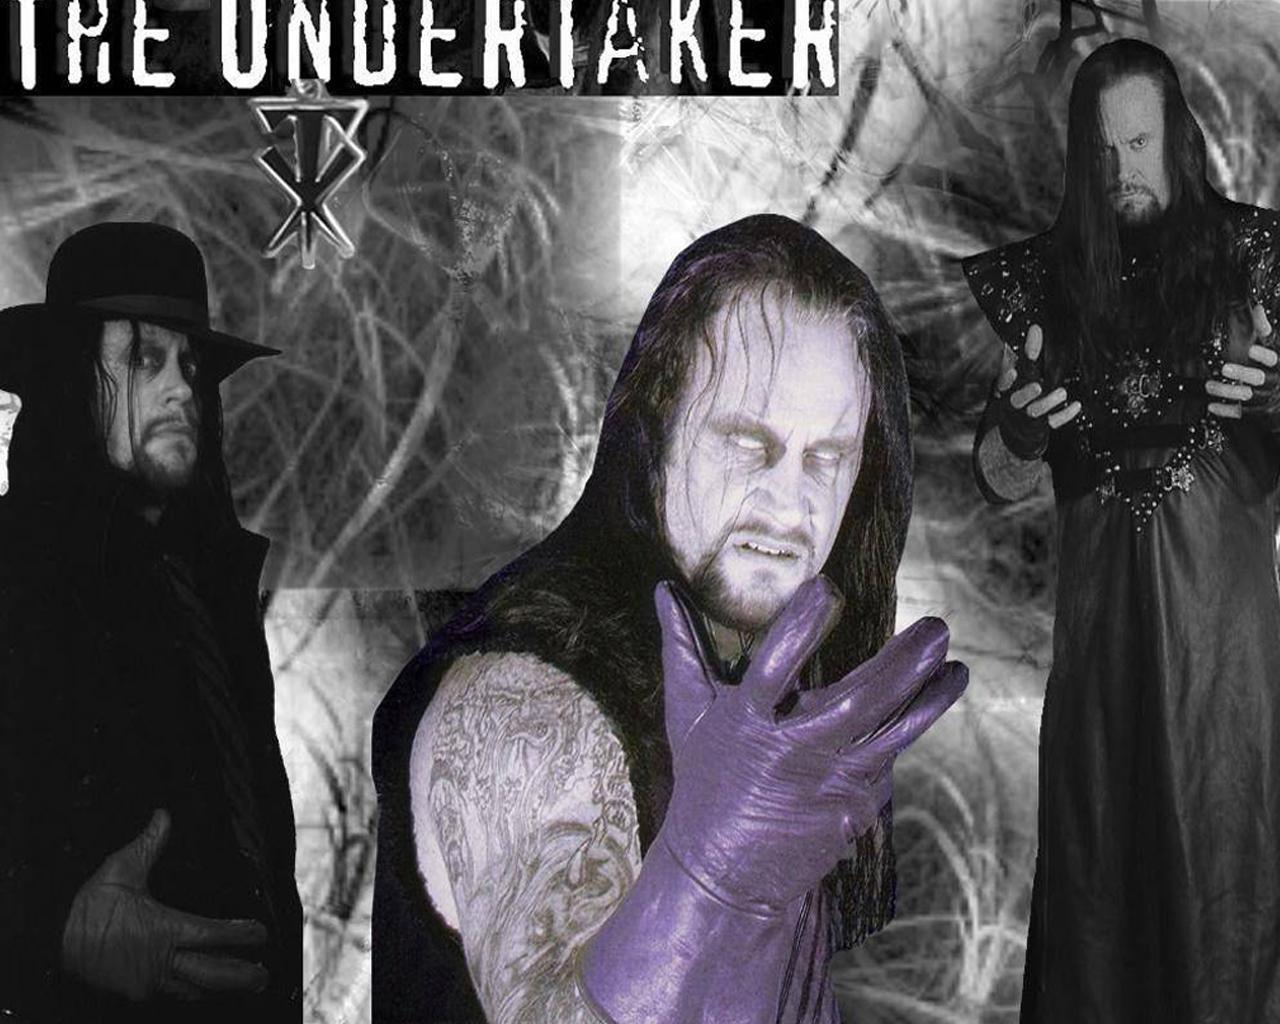 The undertaker   157386   High Quality and Resolution Wallpapers on